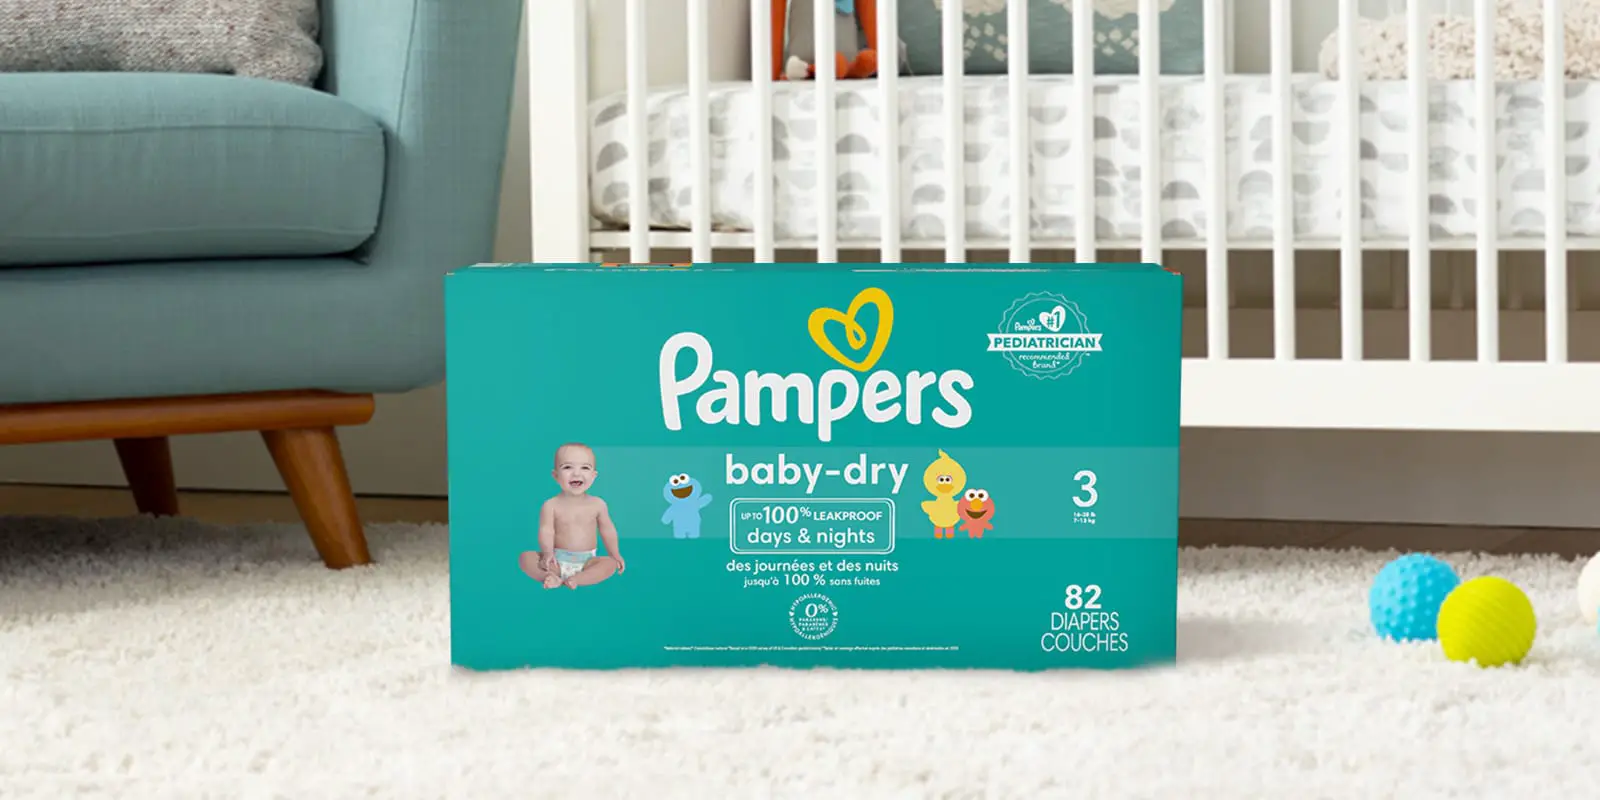 Pampers Baby Dry Vs. Swaddlers